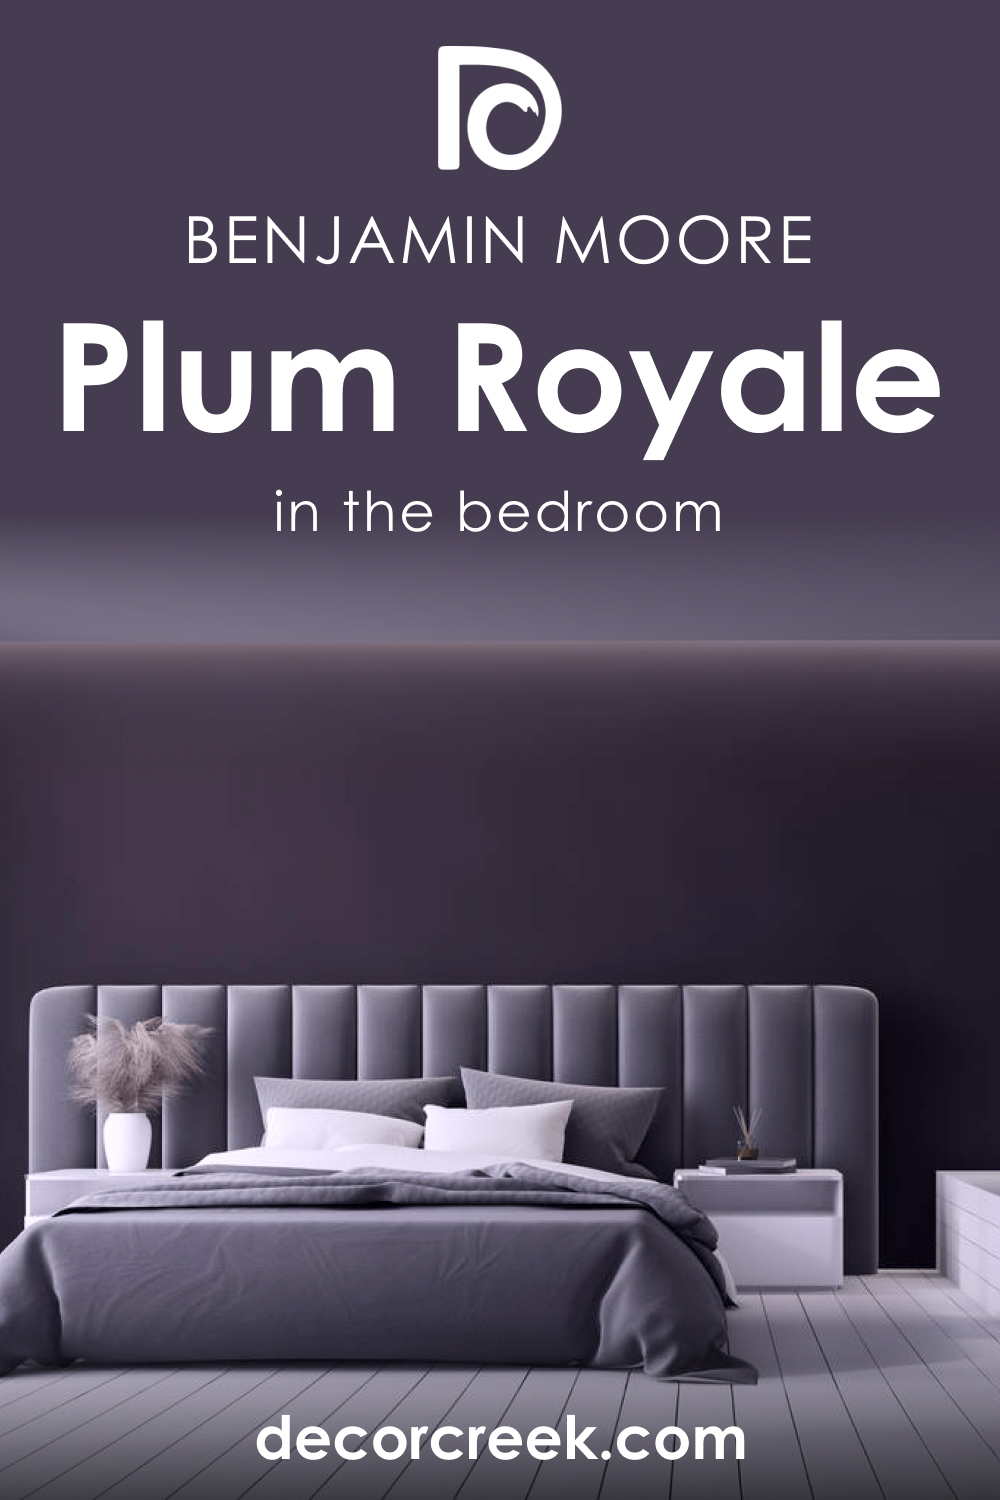 How to Use Plum Royale 2070-20 in the Bedroom?